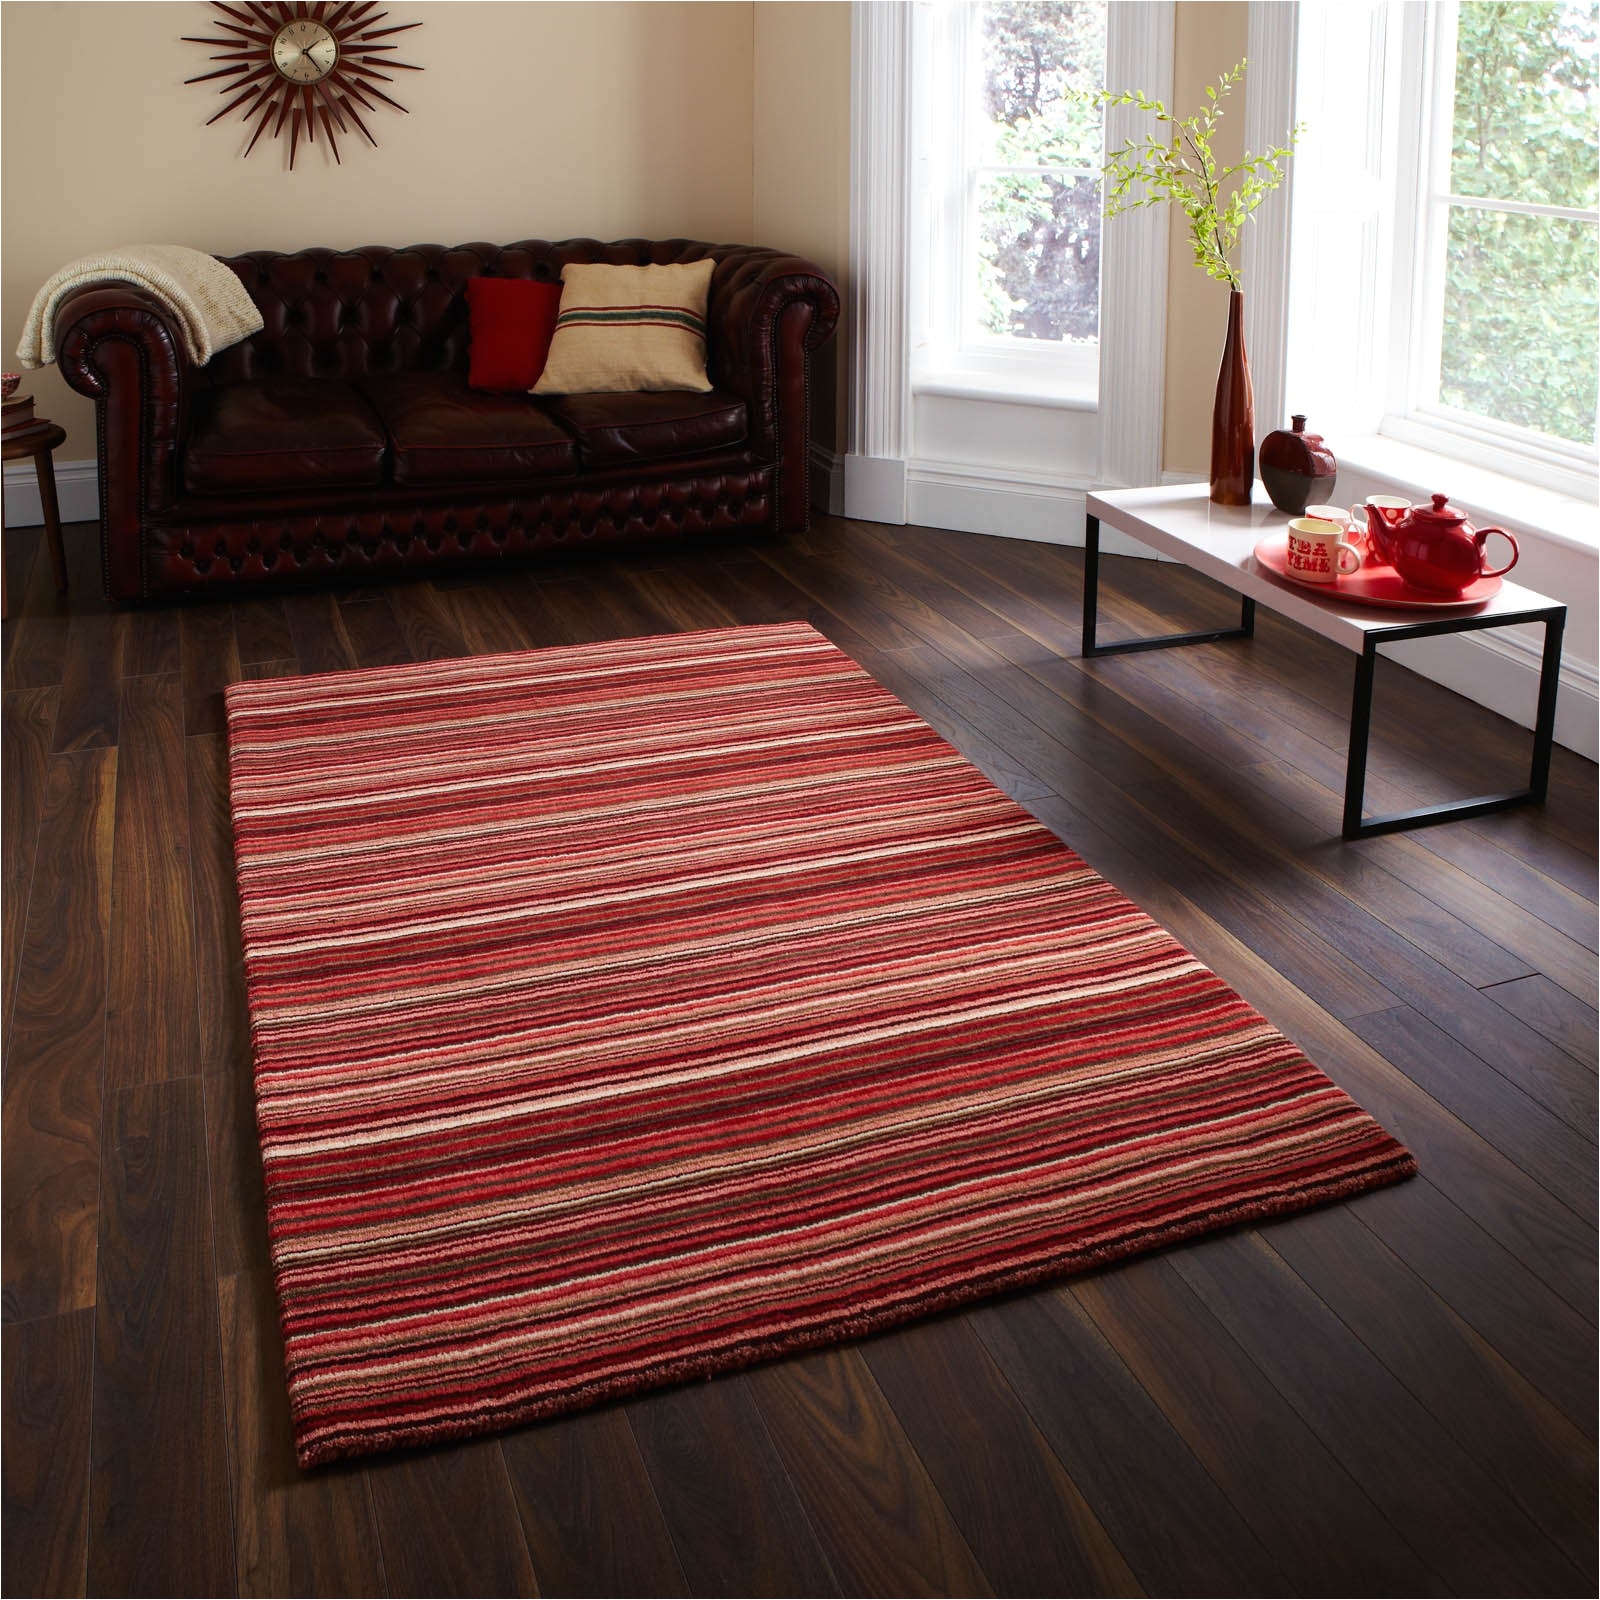 pottery barn rugs discontinued beautiful red area rug 50 s home improvement within ideas 18